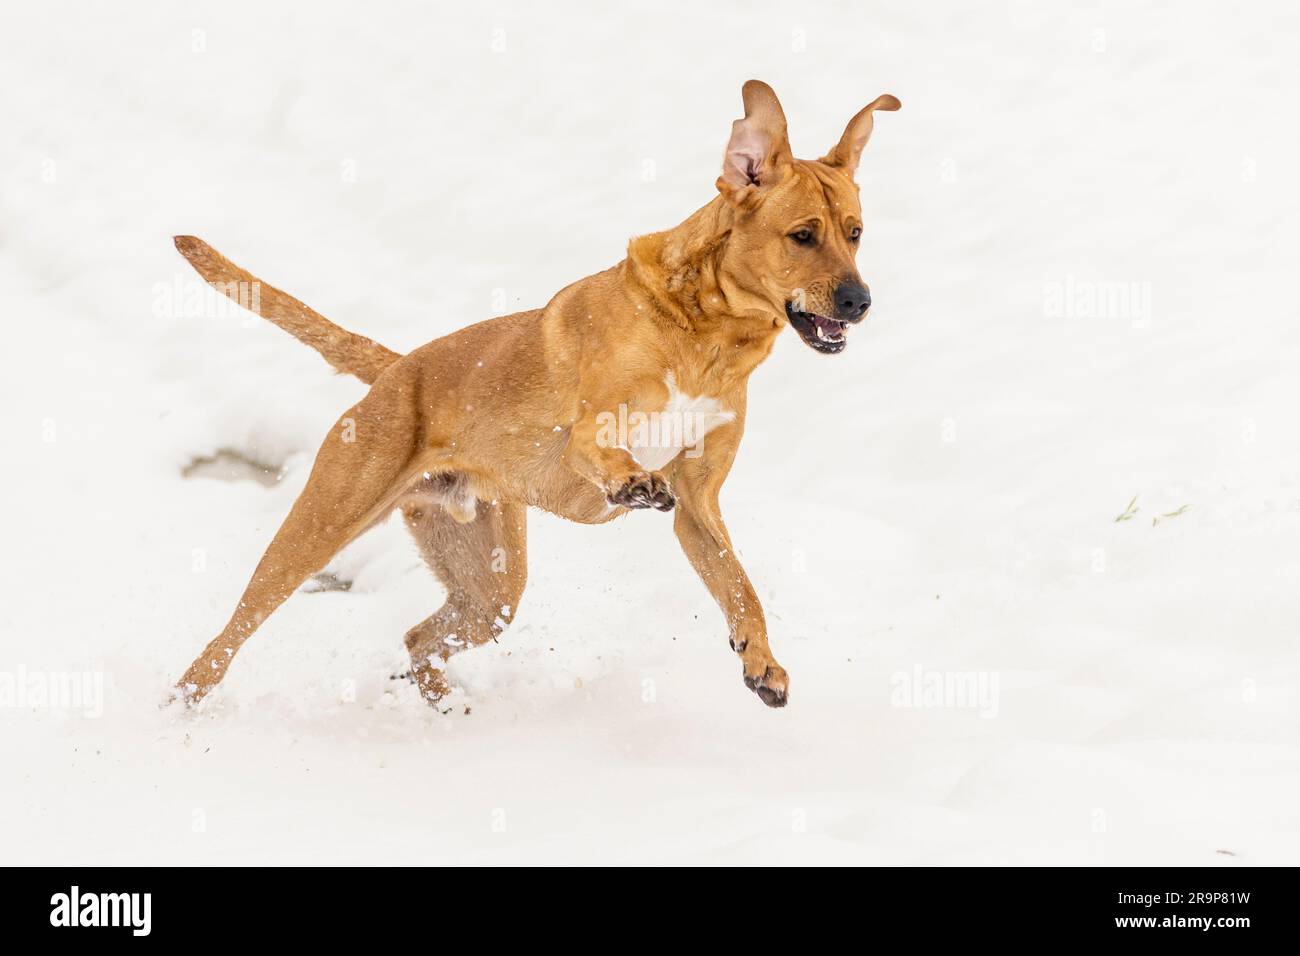 Broholmer. Adult dog running in snow. Germany Stock Photo